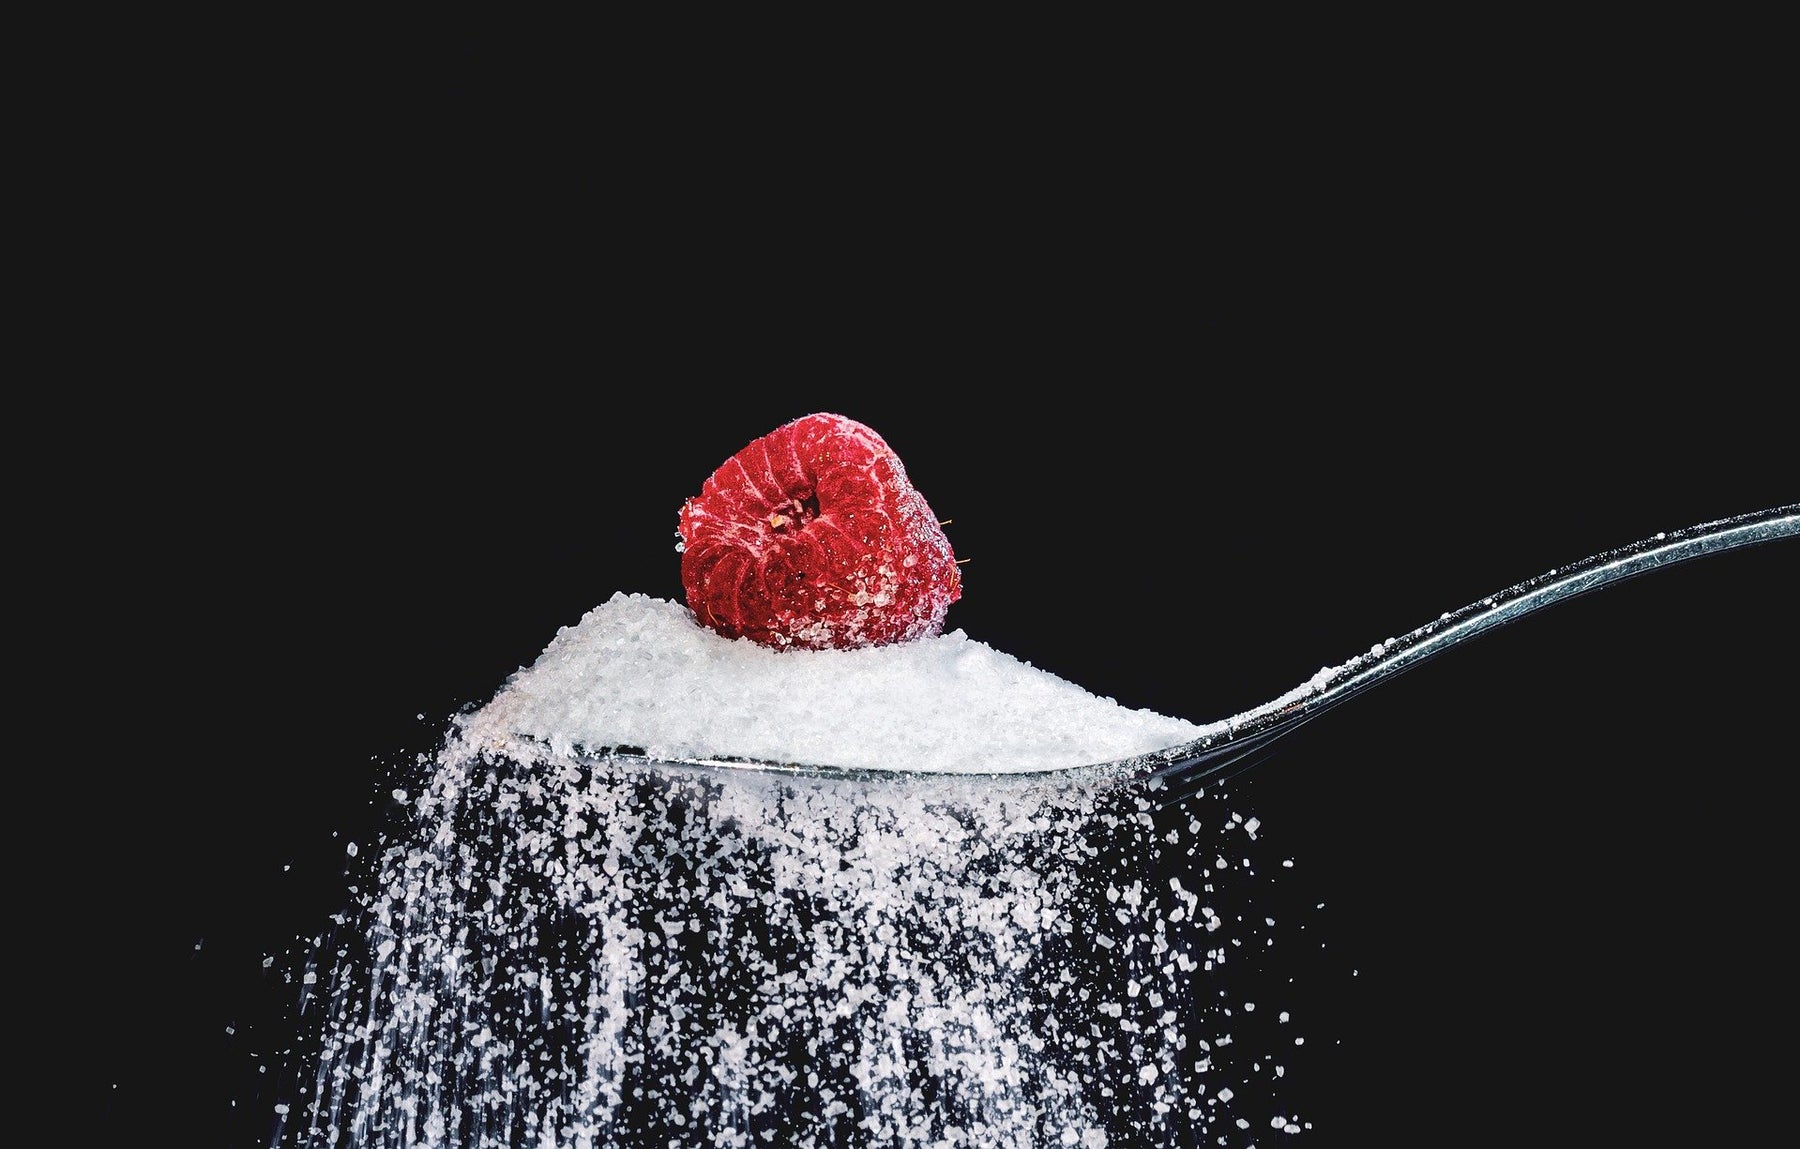 Raspberry above a pile of sugar held by a spoon